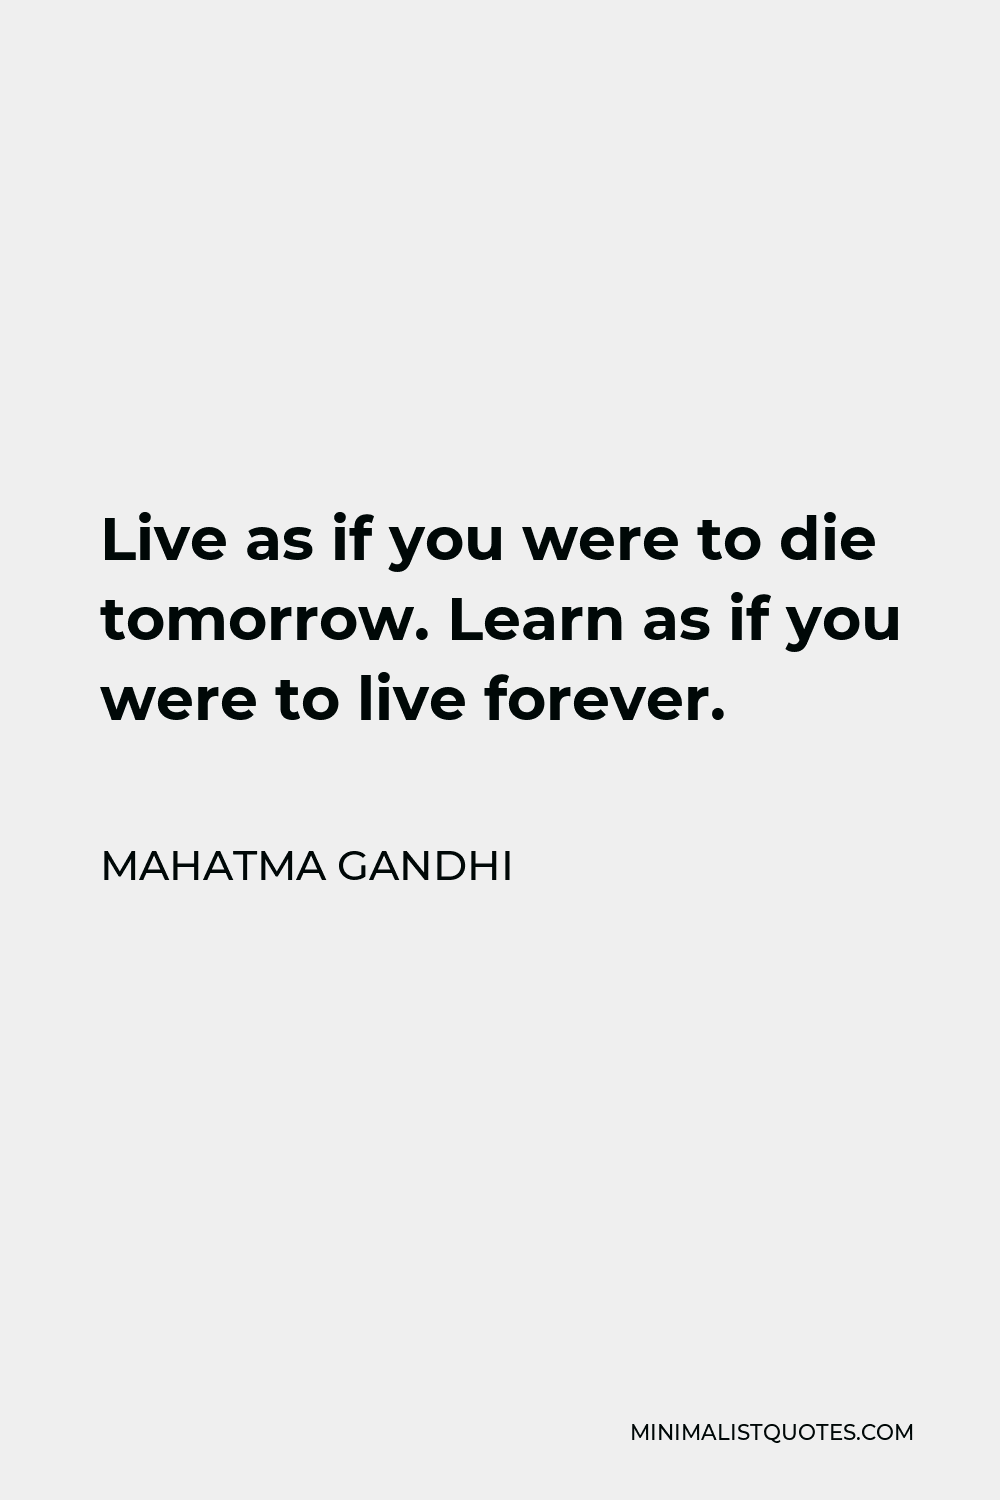 Mahatma Gandhi Quote Live As If You Were To Die Tomorrow Learn As If You Were To Live Forever